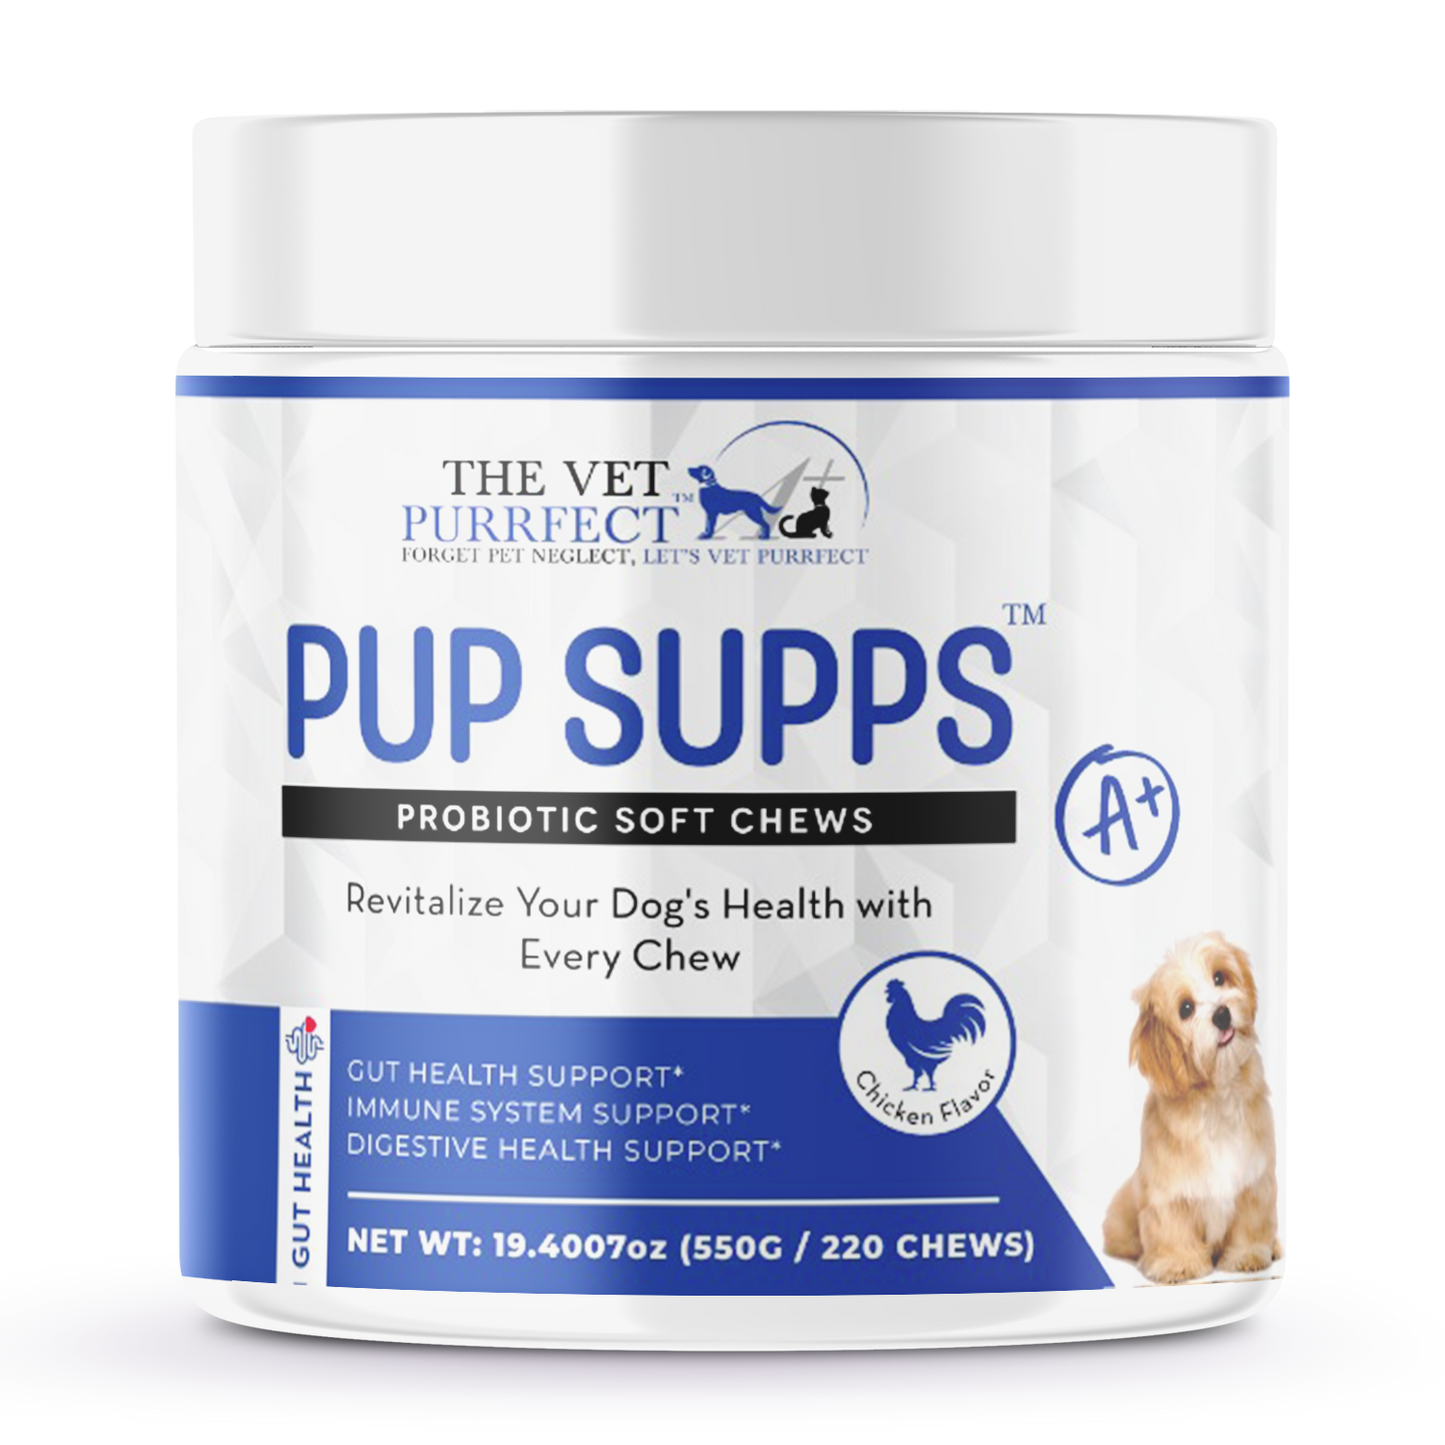 Vet Purrfect probiotic dog treat package with natural formula for digestive and gut health.